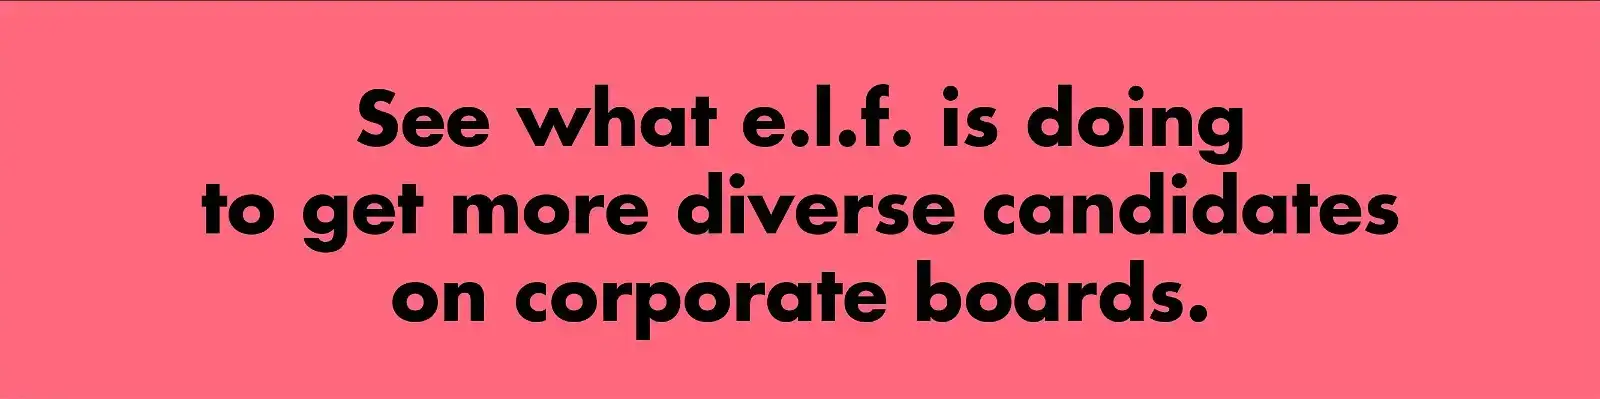 see what e.l.f. is doing to get more diverse candidates on corporate boards